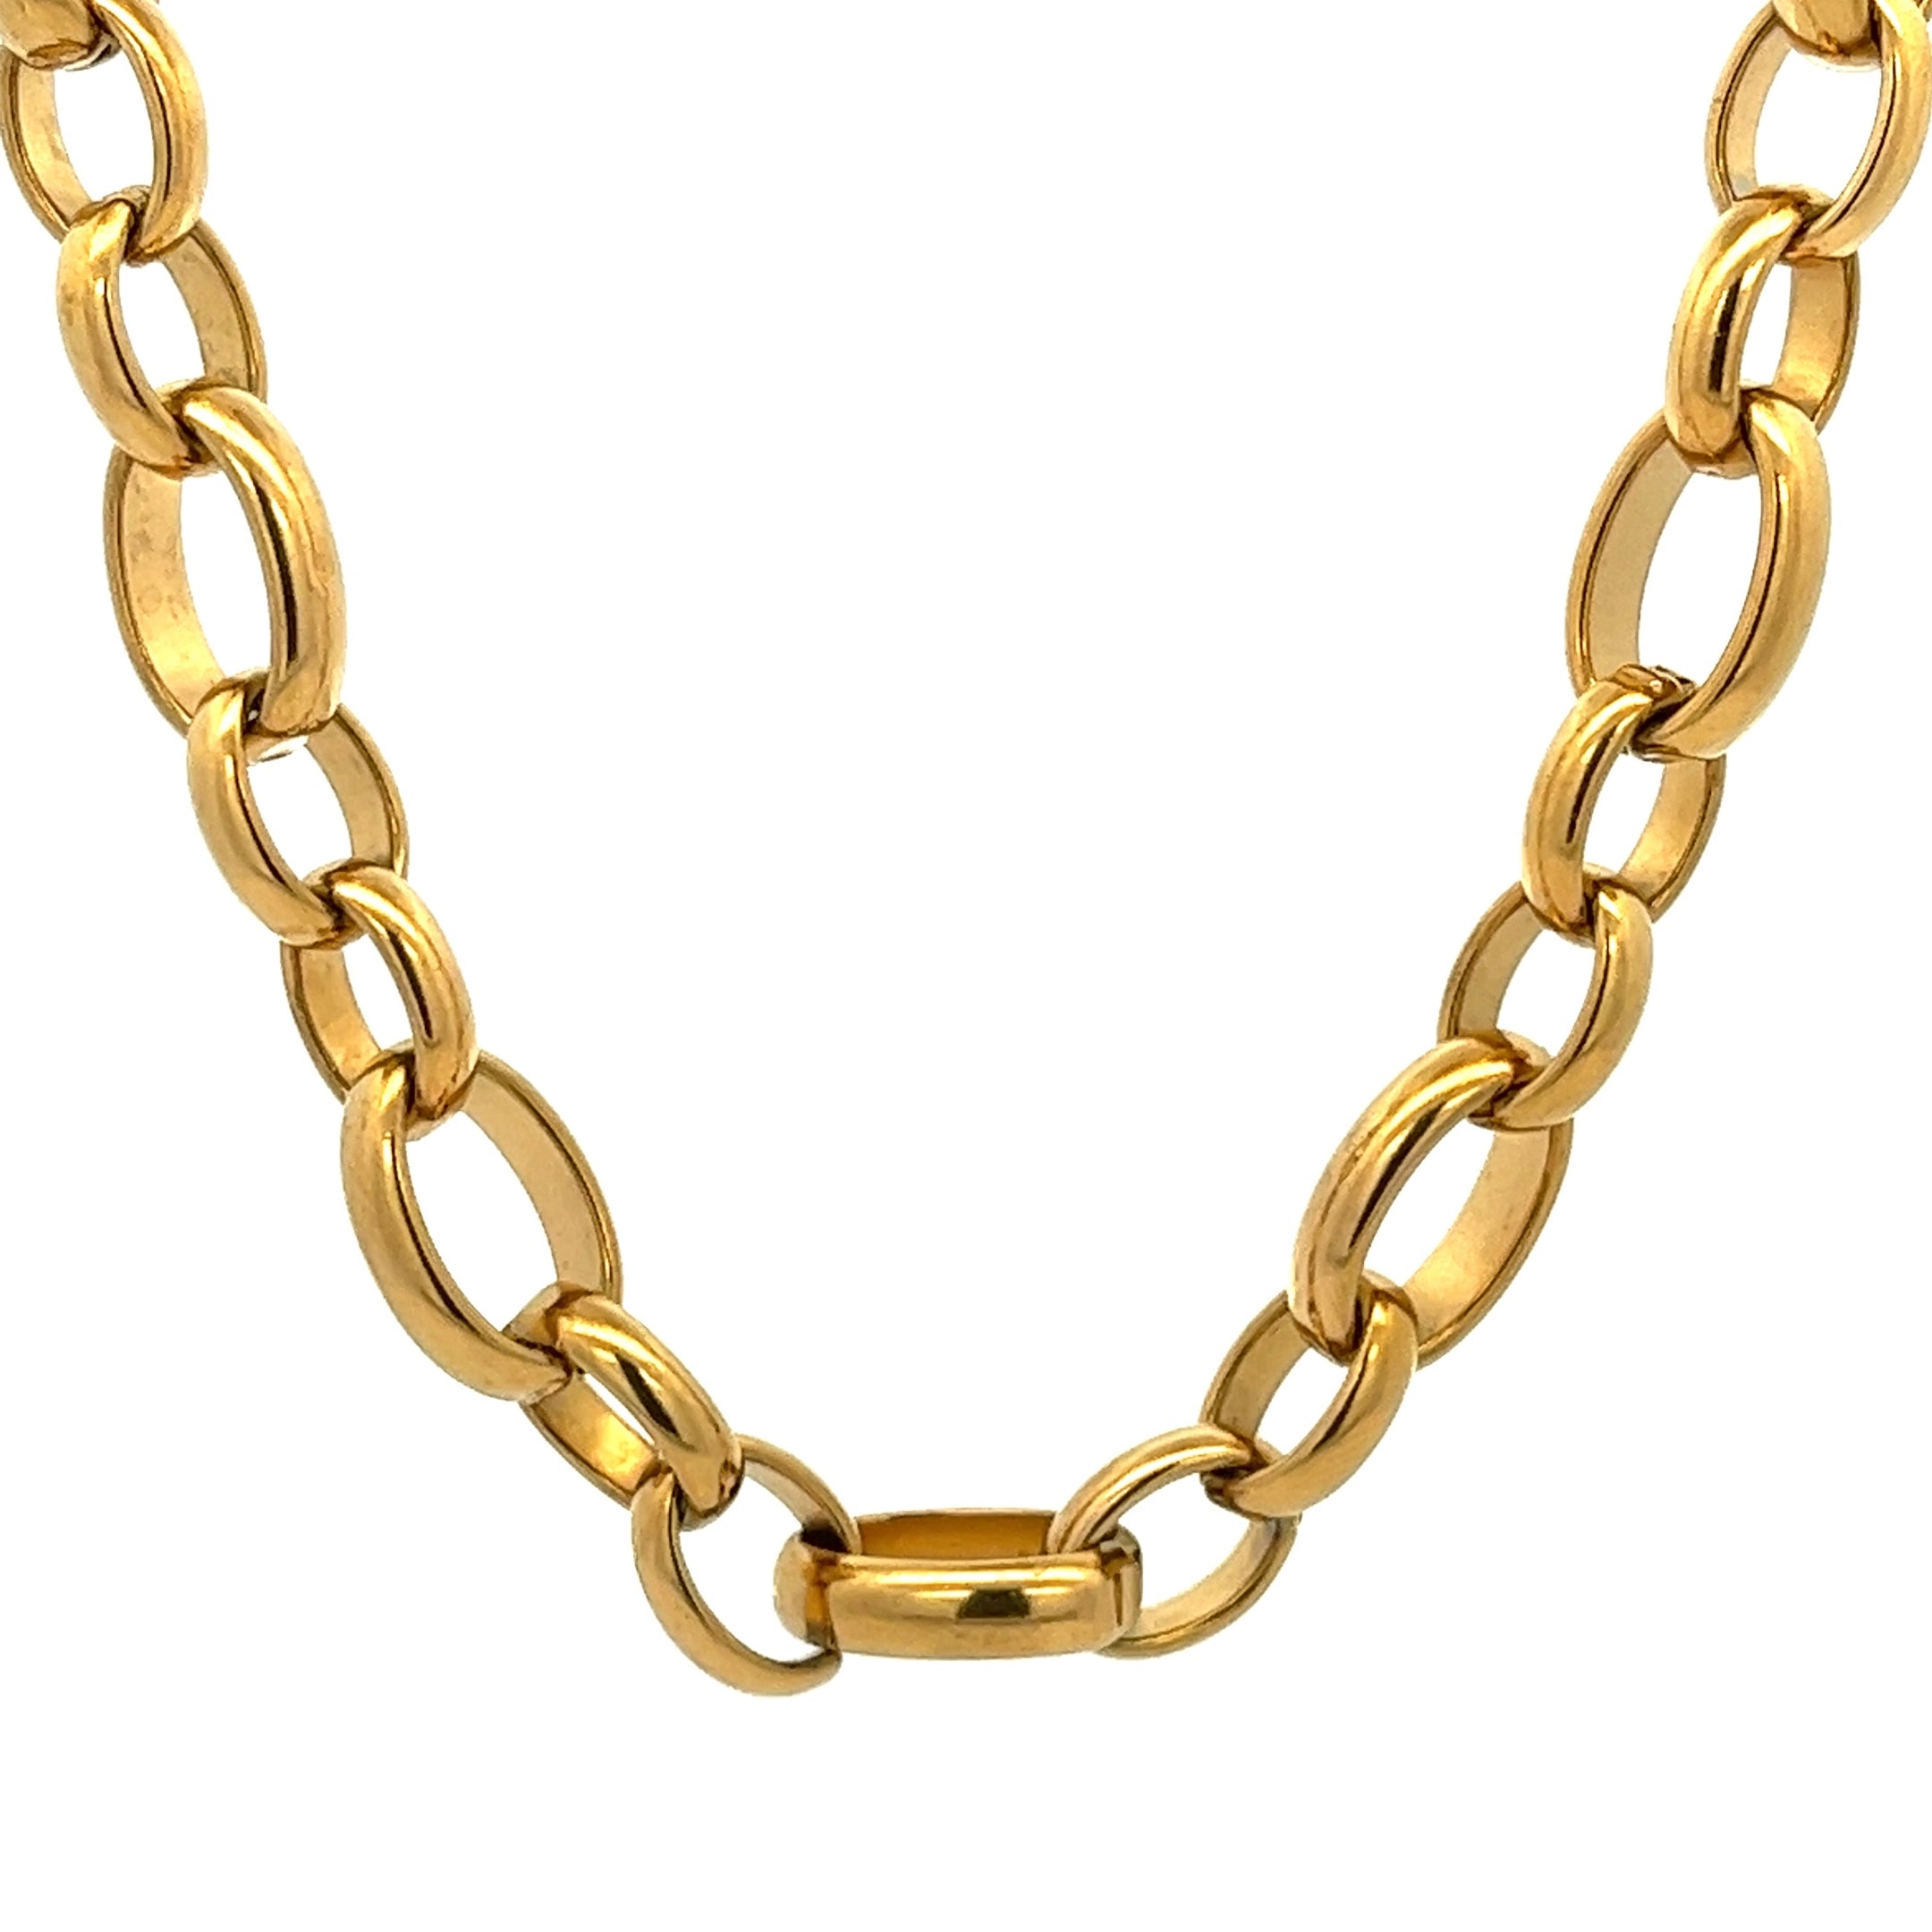 METAL BASE OVAL LINK CHAIN